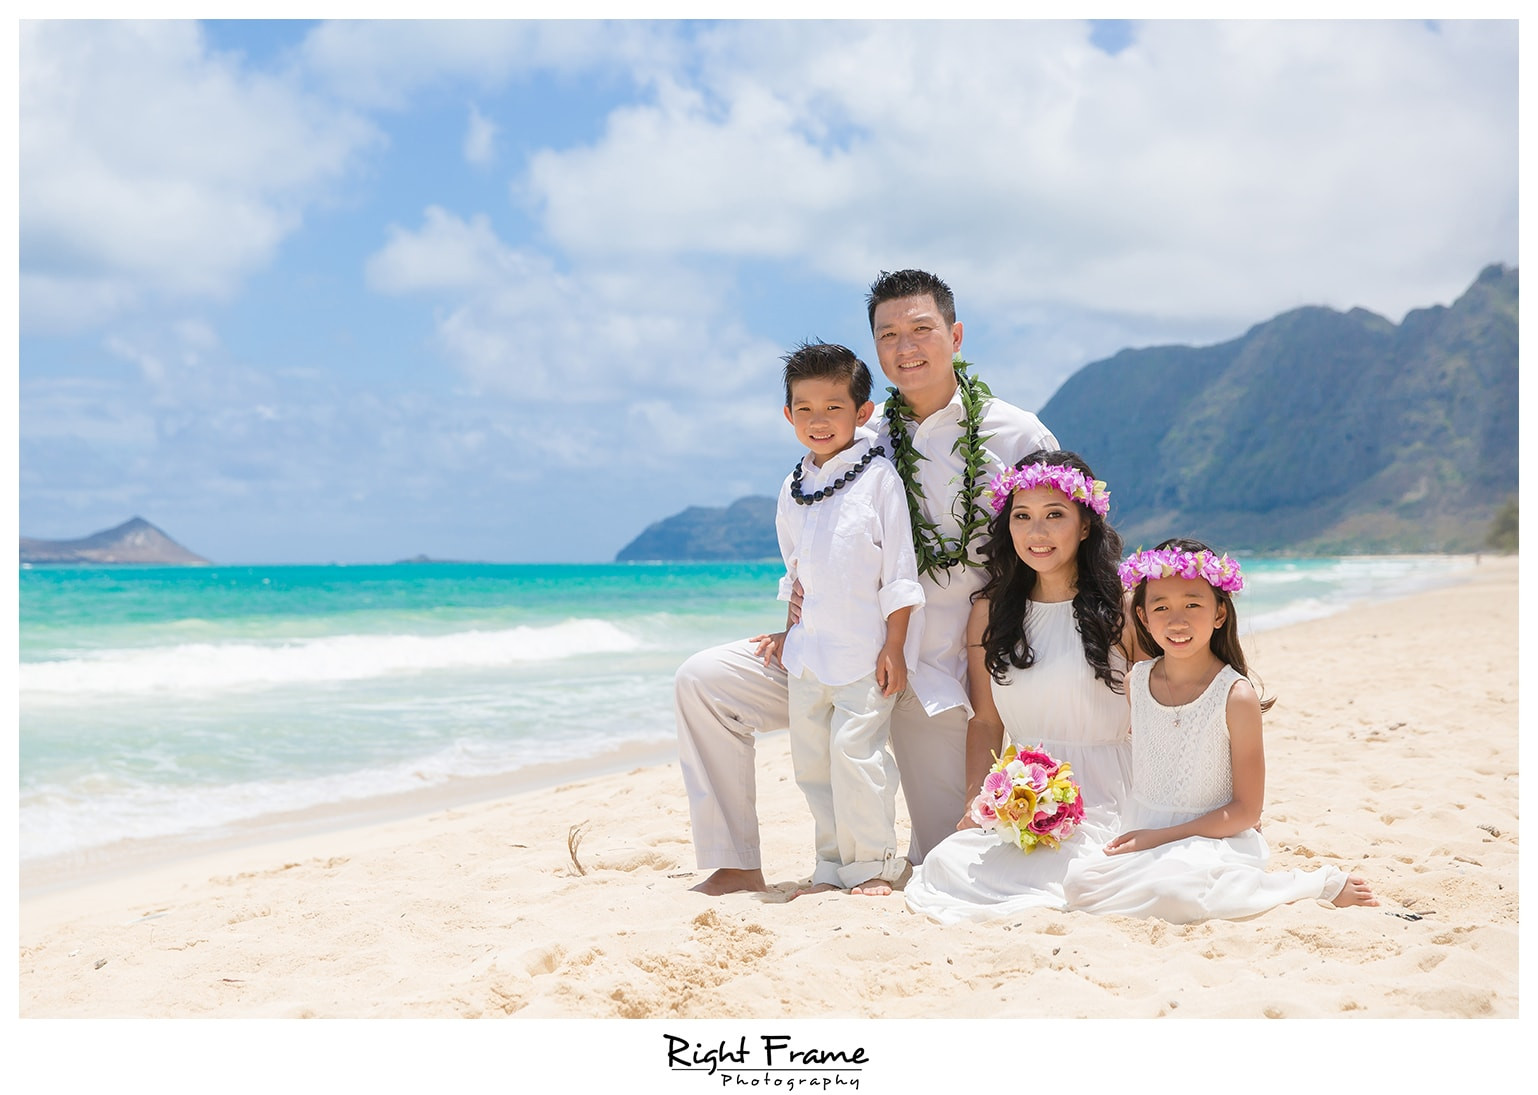 Hawaiian Wedding Vows
 Wedding Vow Renewal in Oahu Hawaii by RIGHT FRAME PHOTOGRAPHY